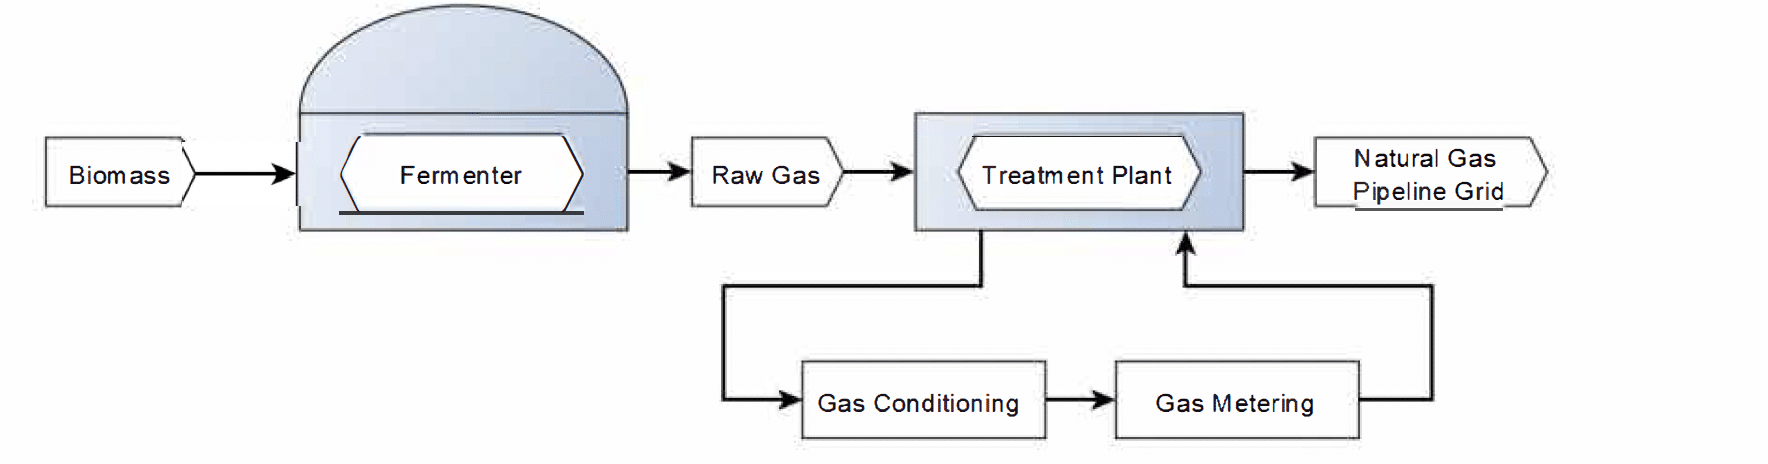 Figure 1: Simplified diagram of a biogas production and feed-in plant